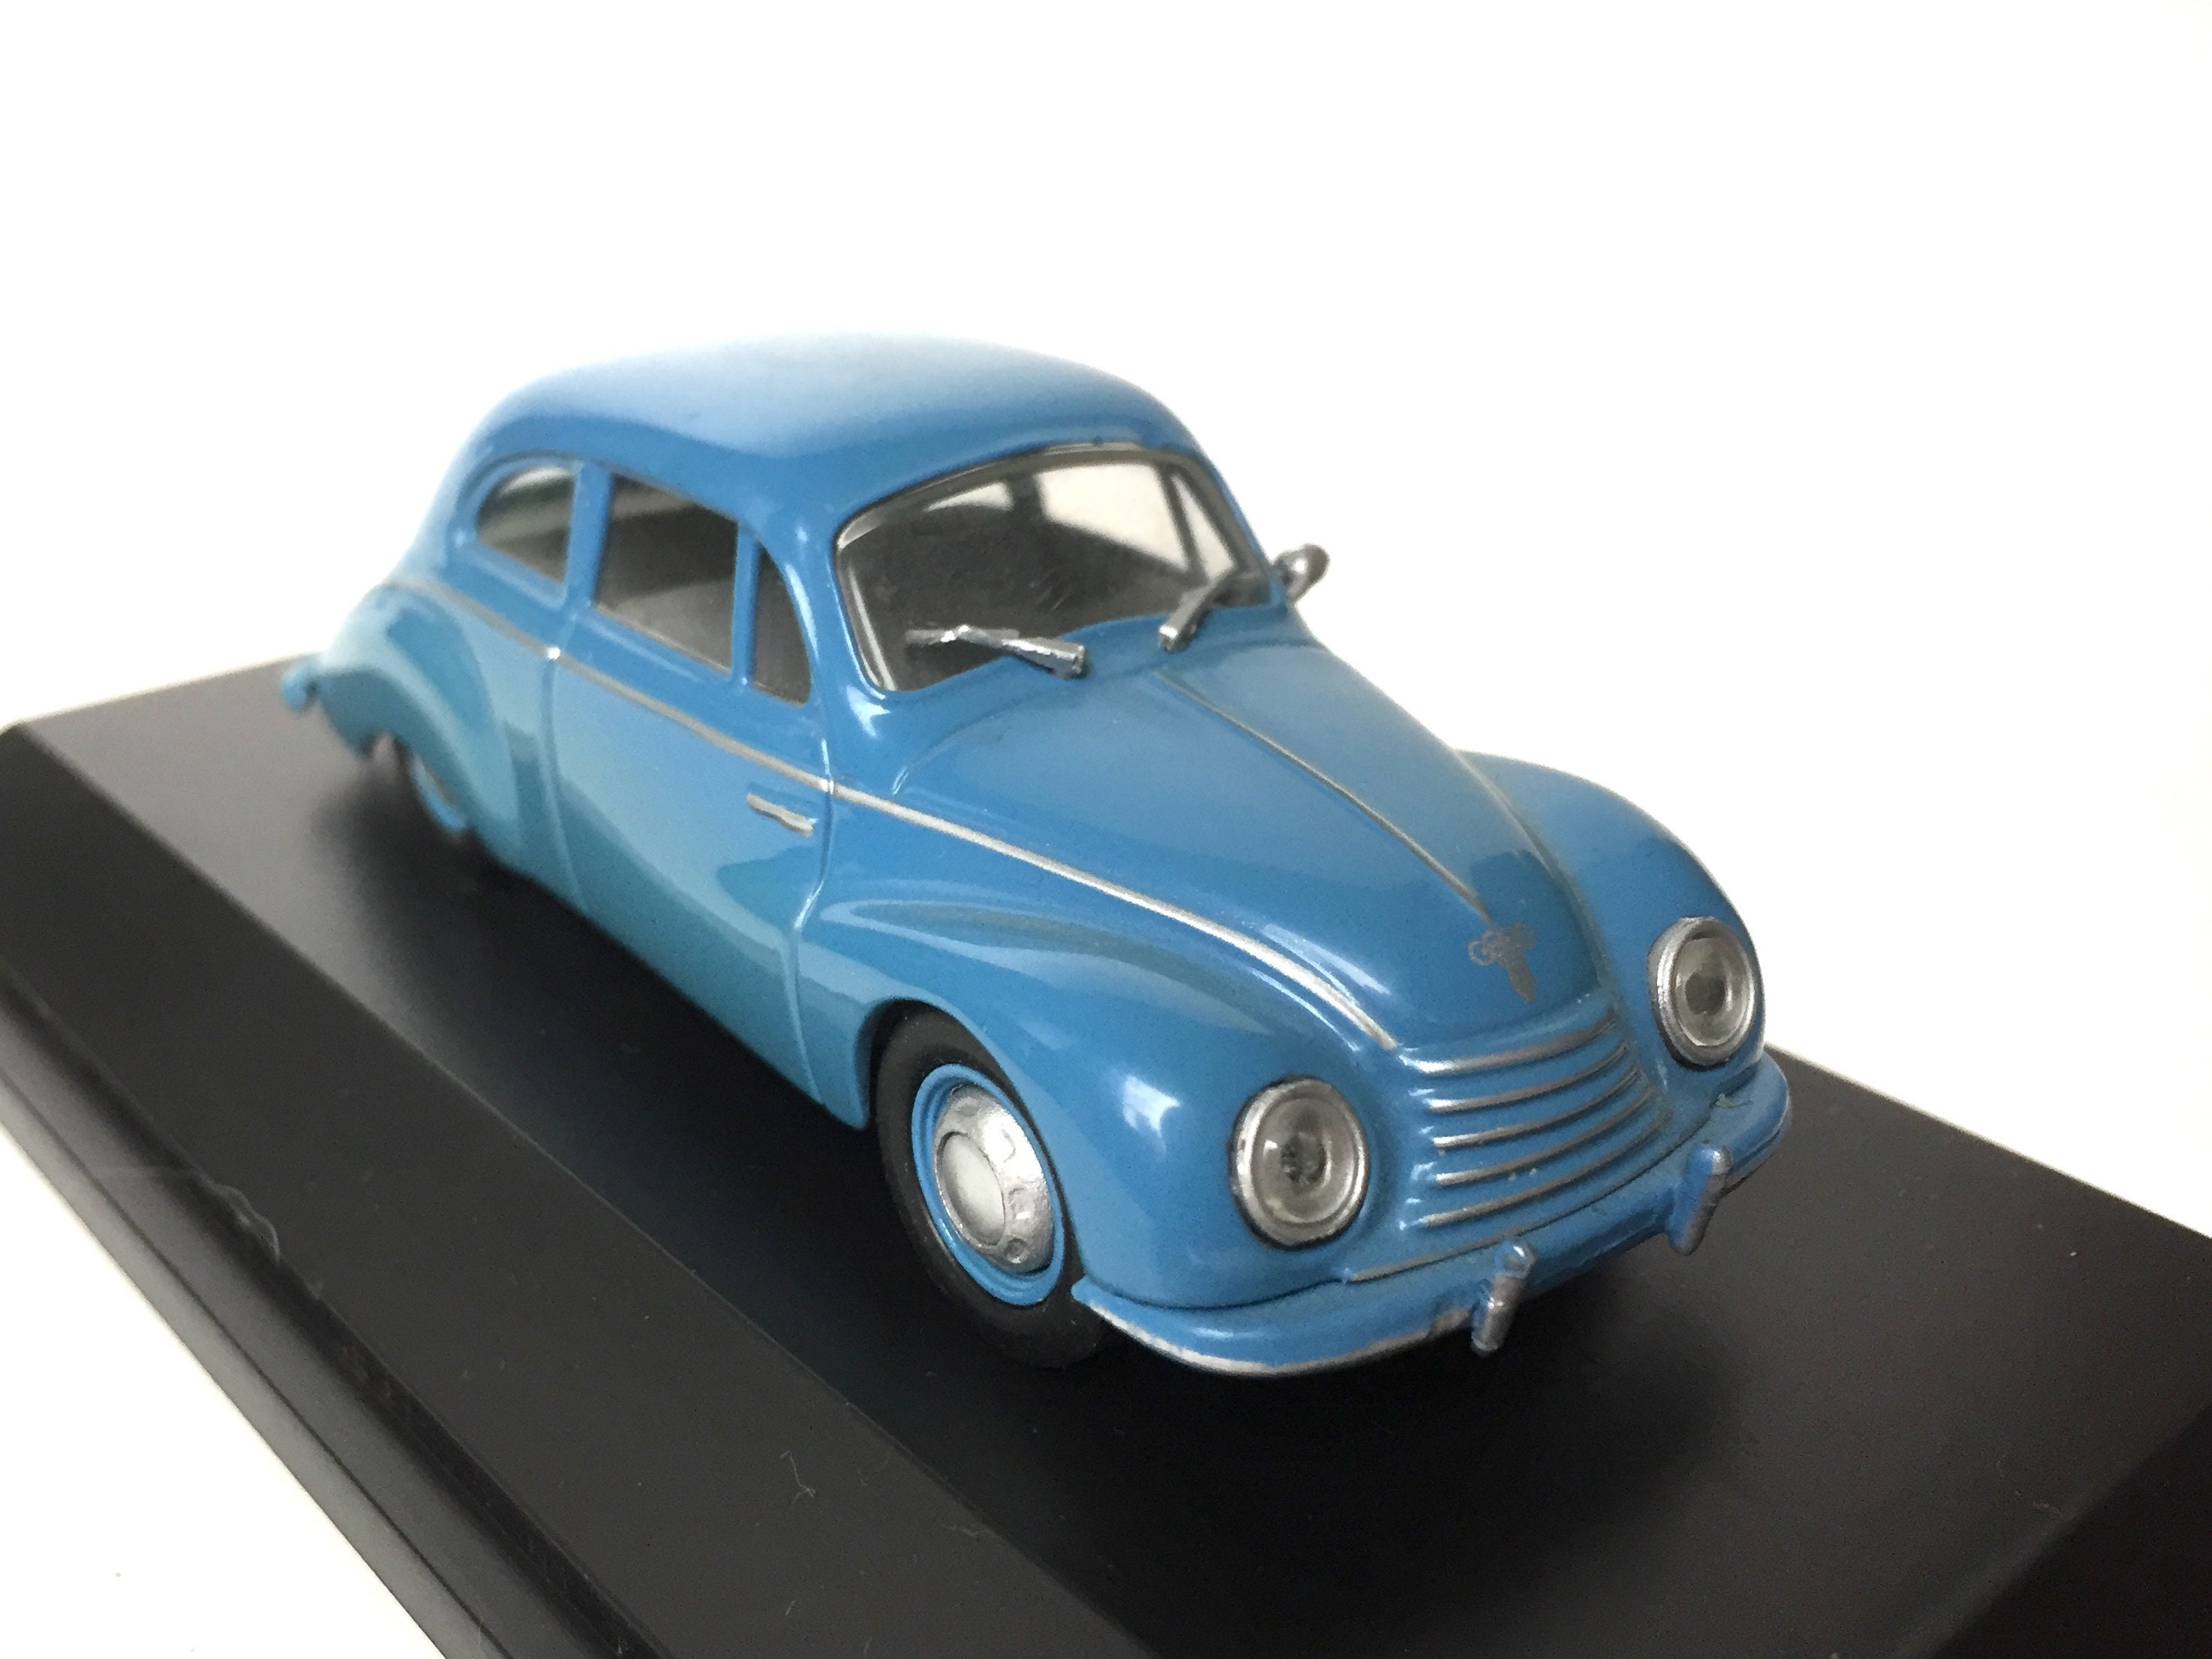 ORIGINAL Vintage Tinplate AutoUnion CAR  from the 1950 made in PortugaL 